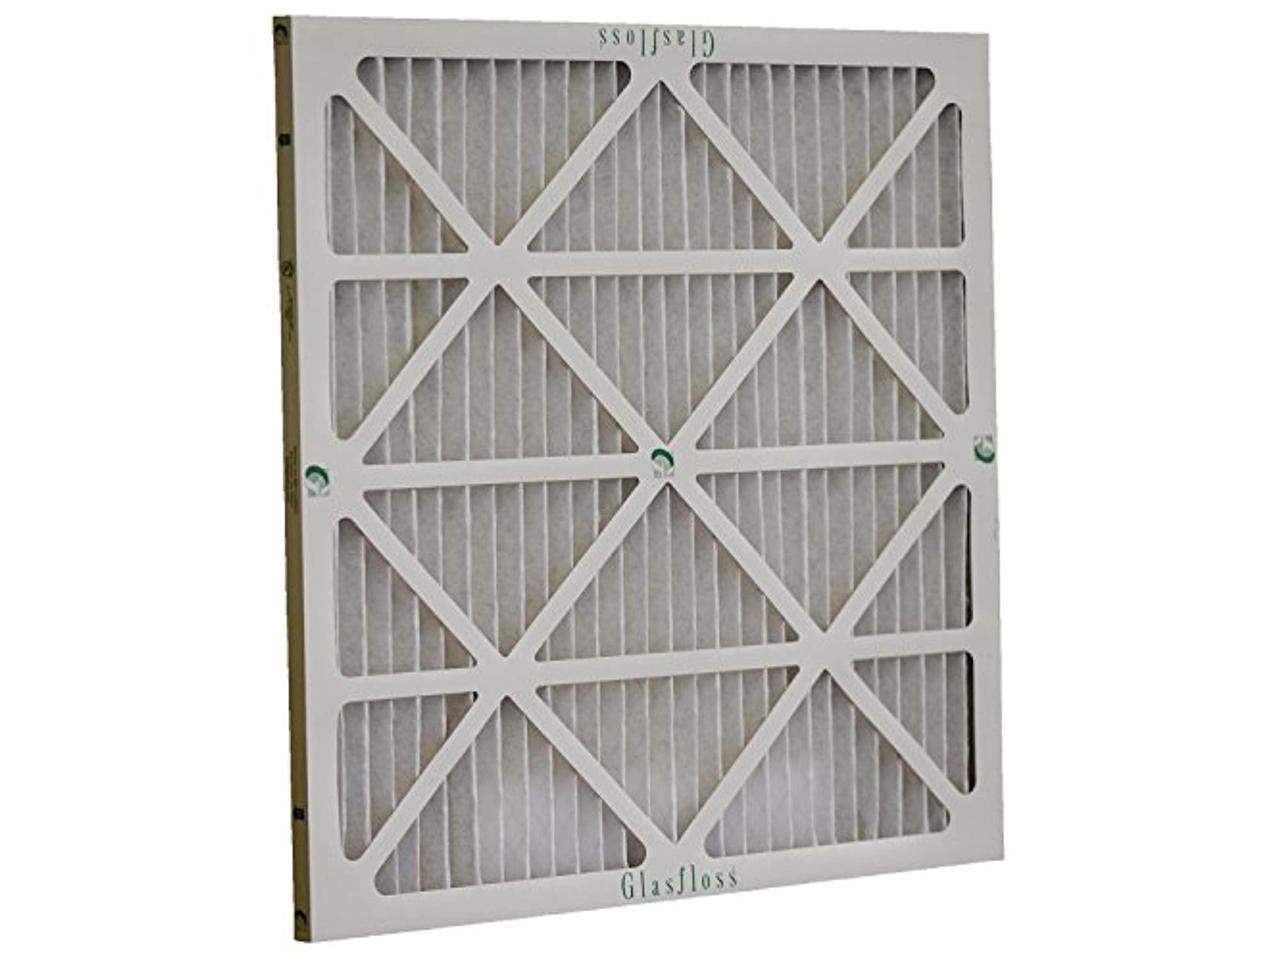 AIR FILTERS 12 PACK GLASFLOSS ZXP MERV 10 HOME FURNACE AIR CONDITIONING PLEATED